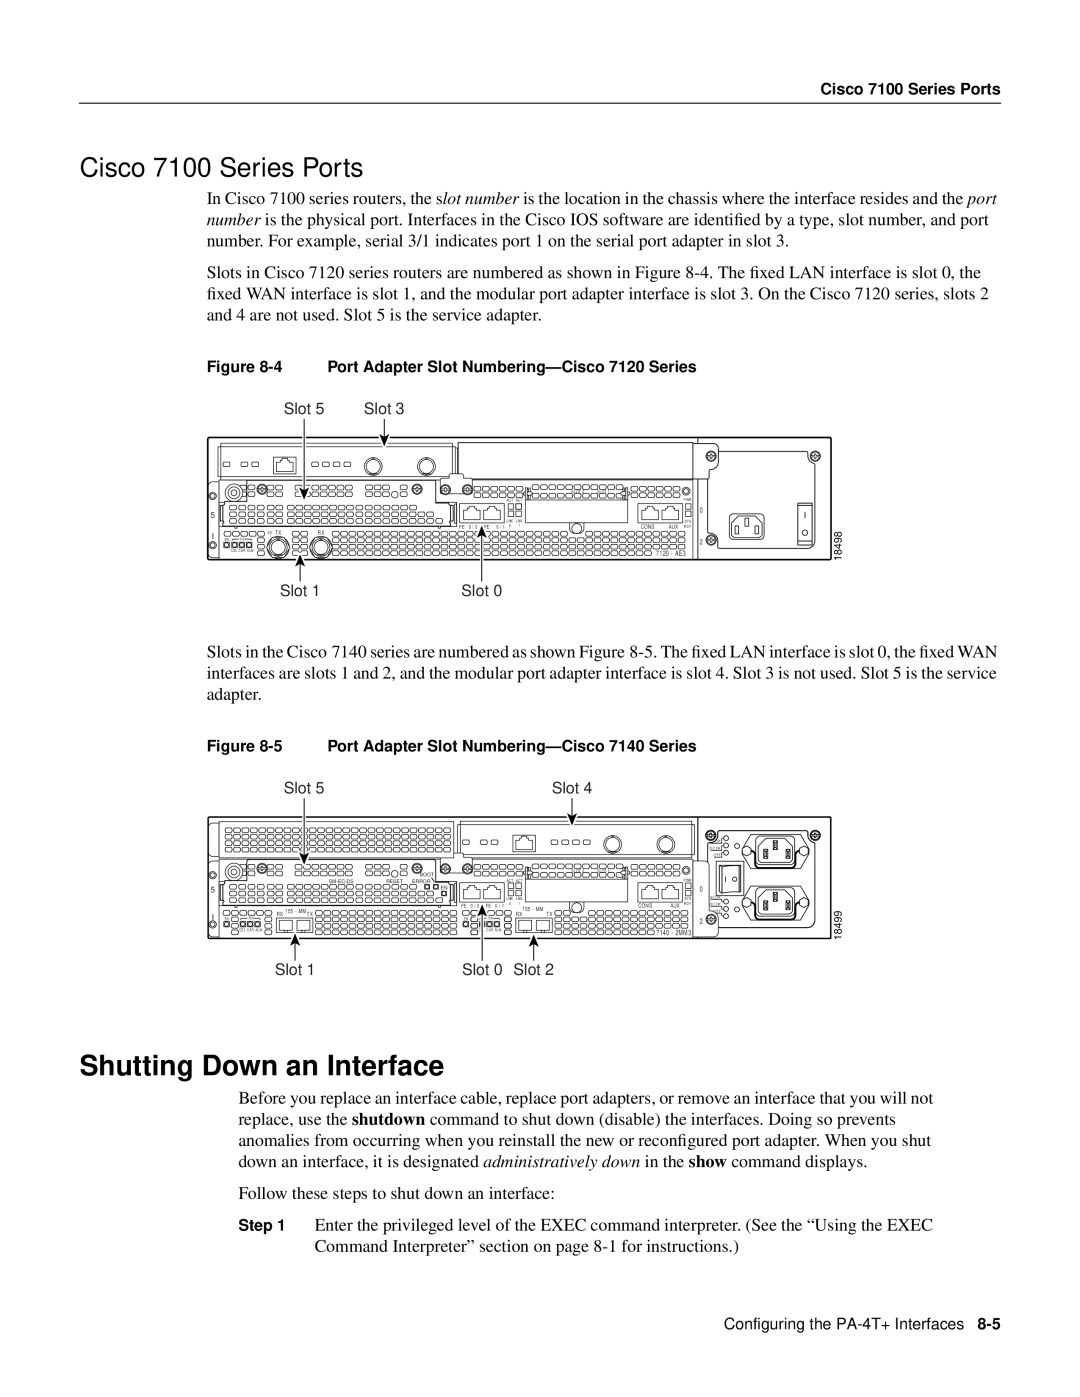 Cisco Systems PA-4T manual Shutting Down an Interface, Cisco 7100 Series Ports 